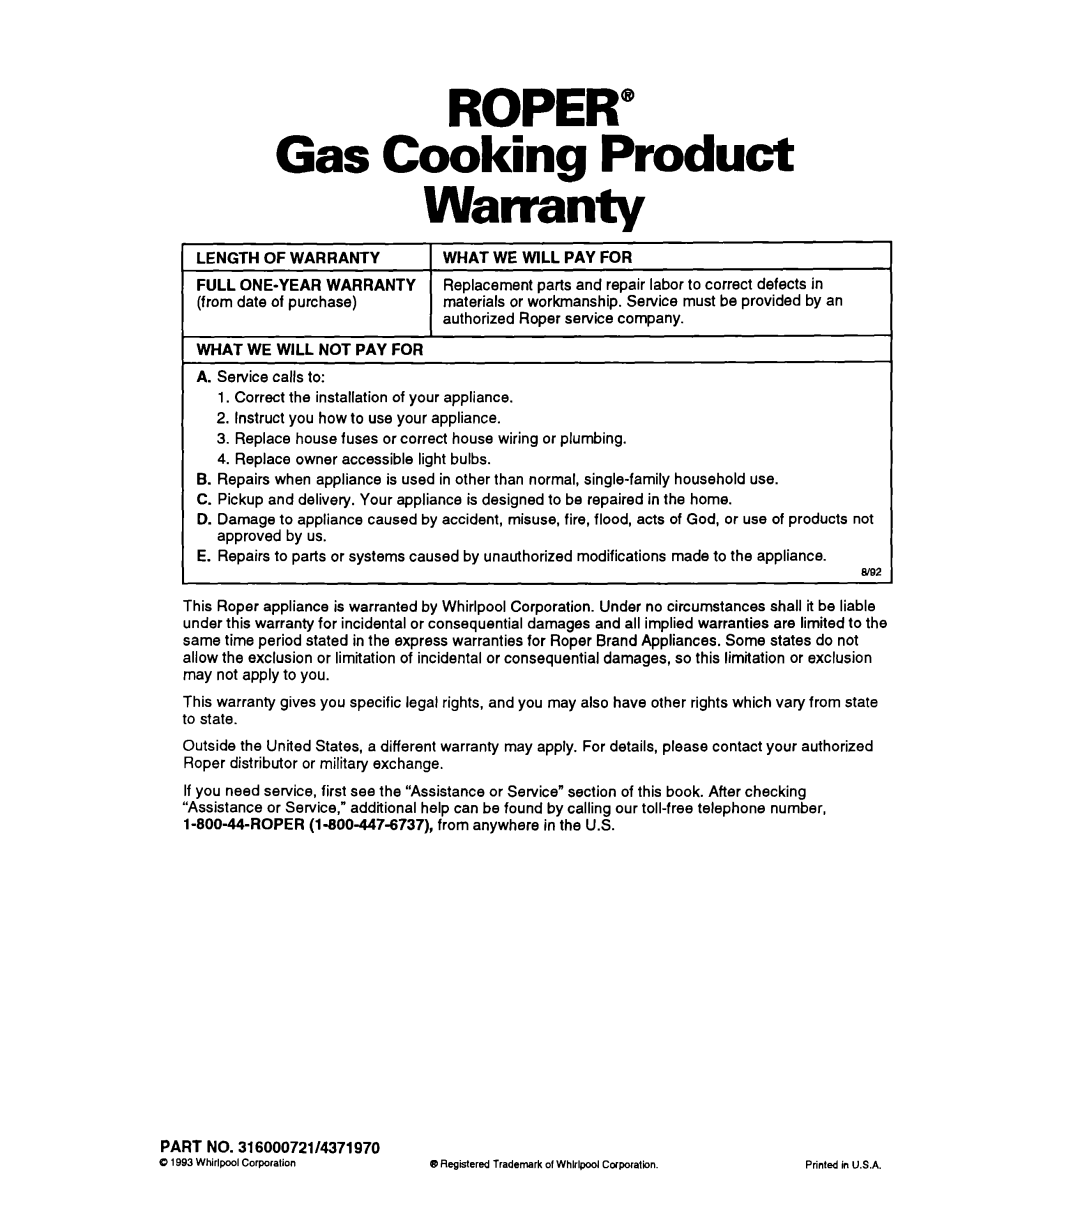 Whirlpool FGP325A ROPER” Gas Cooking Product Warranty, Length Of Warranty, What We Will Pay For, Full One-Yearwarranty 